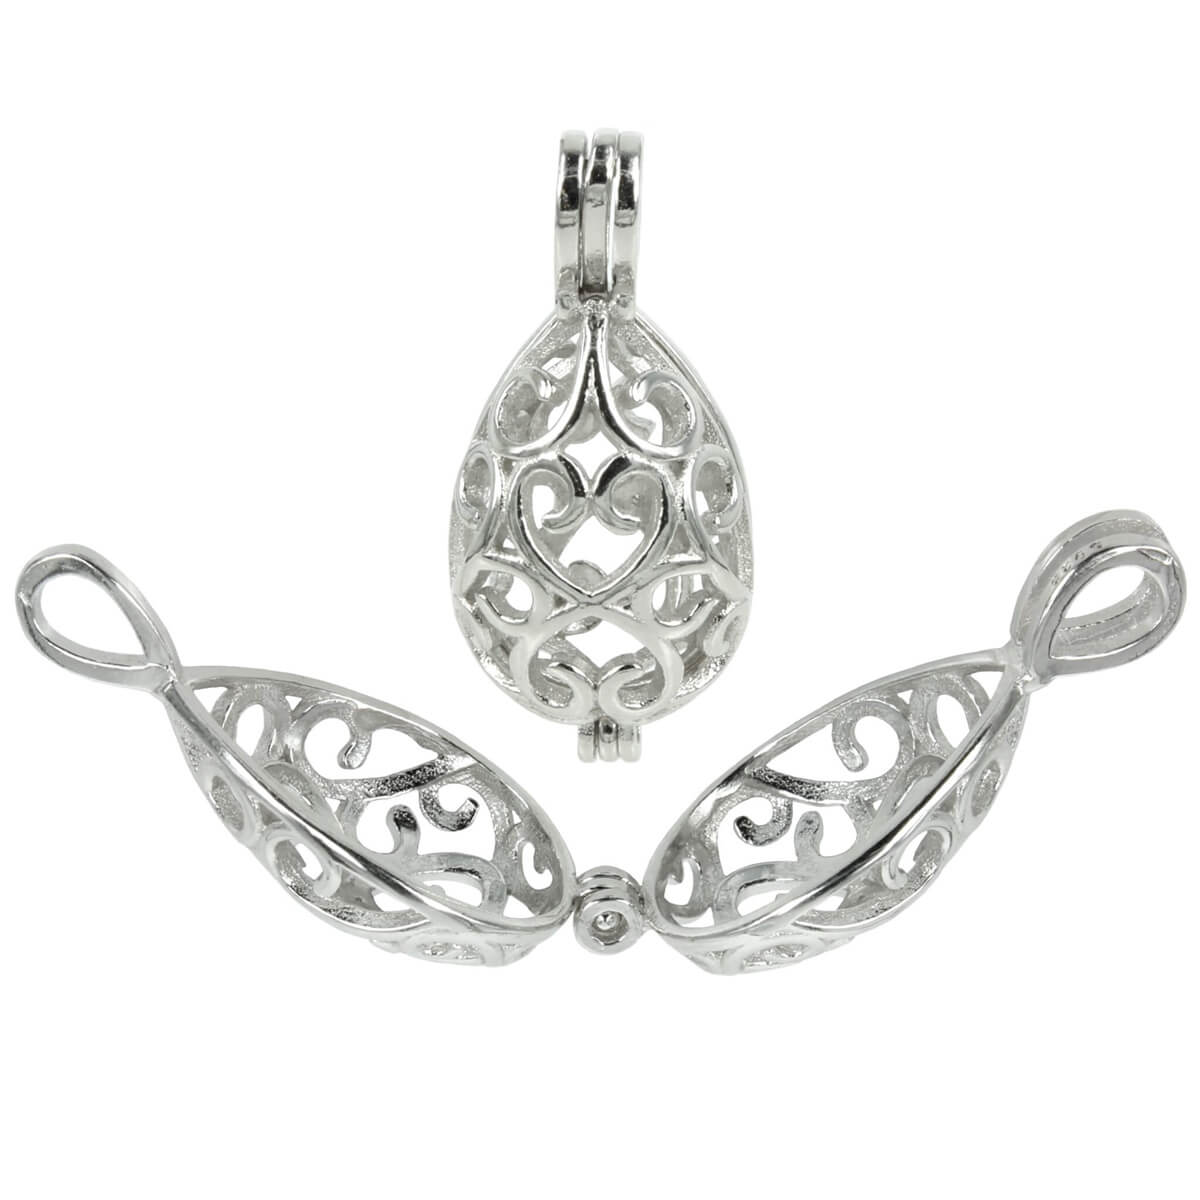 Oval Filigree Cage Pendant in Sterling Silver for (approx.) 10mm Stones 